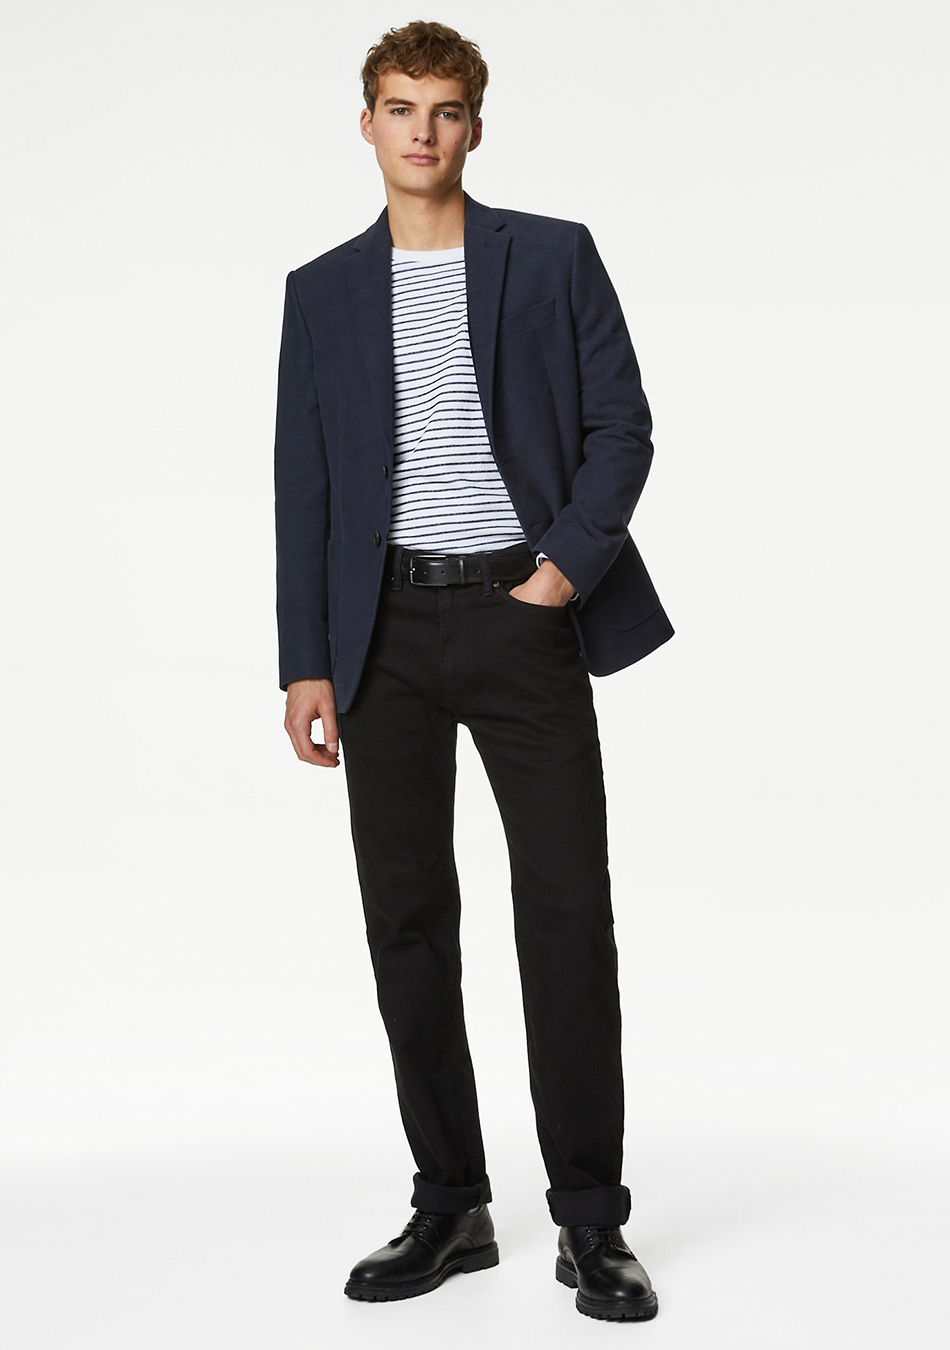 Navy blazer, striped t-shirt, black jeans, and black derby shoes